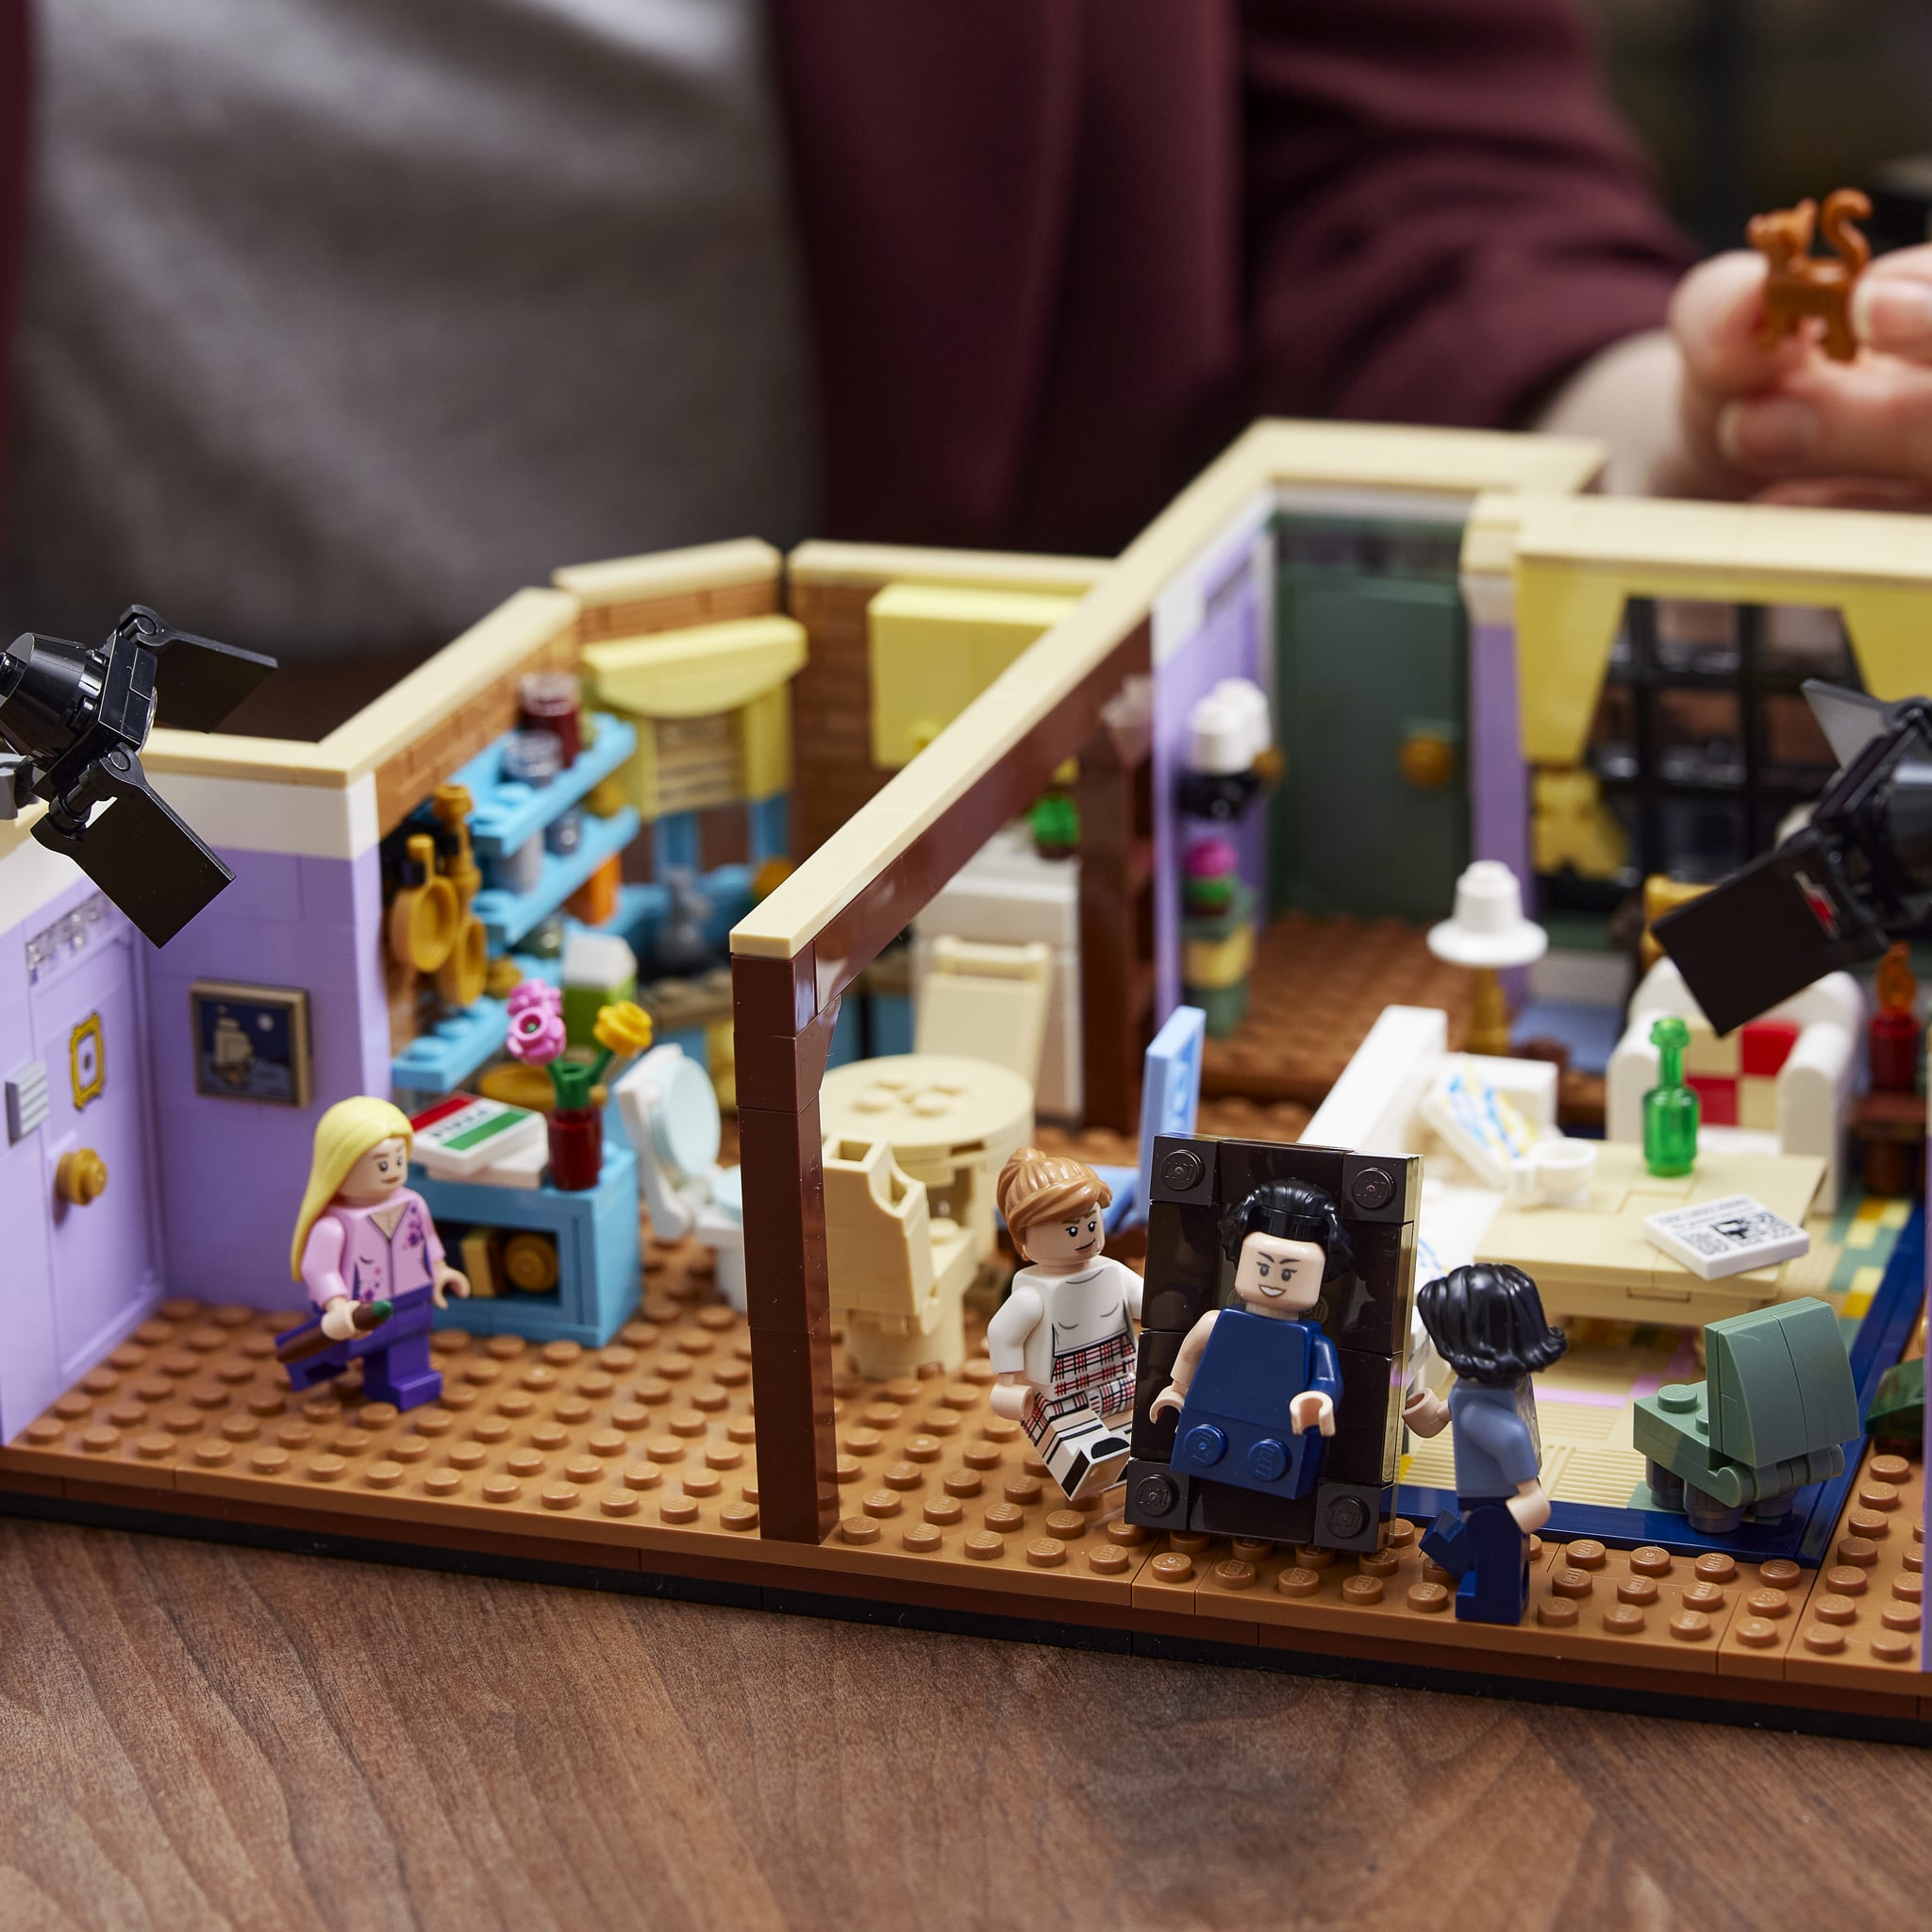 See of the Incredible Lego Friends Apartments Set | POPSUGAR Family